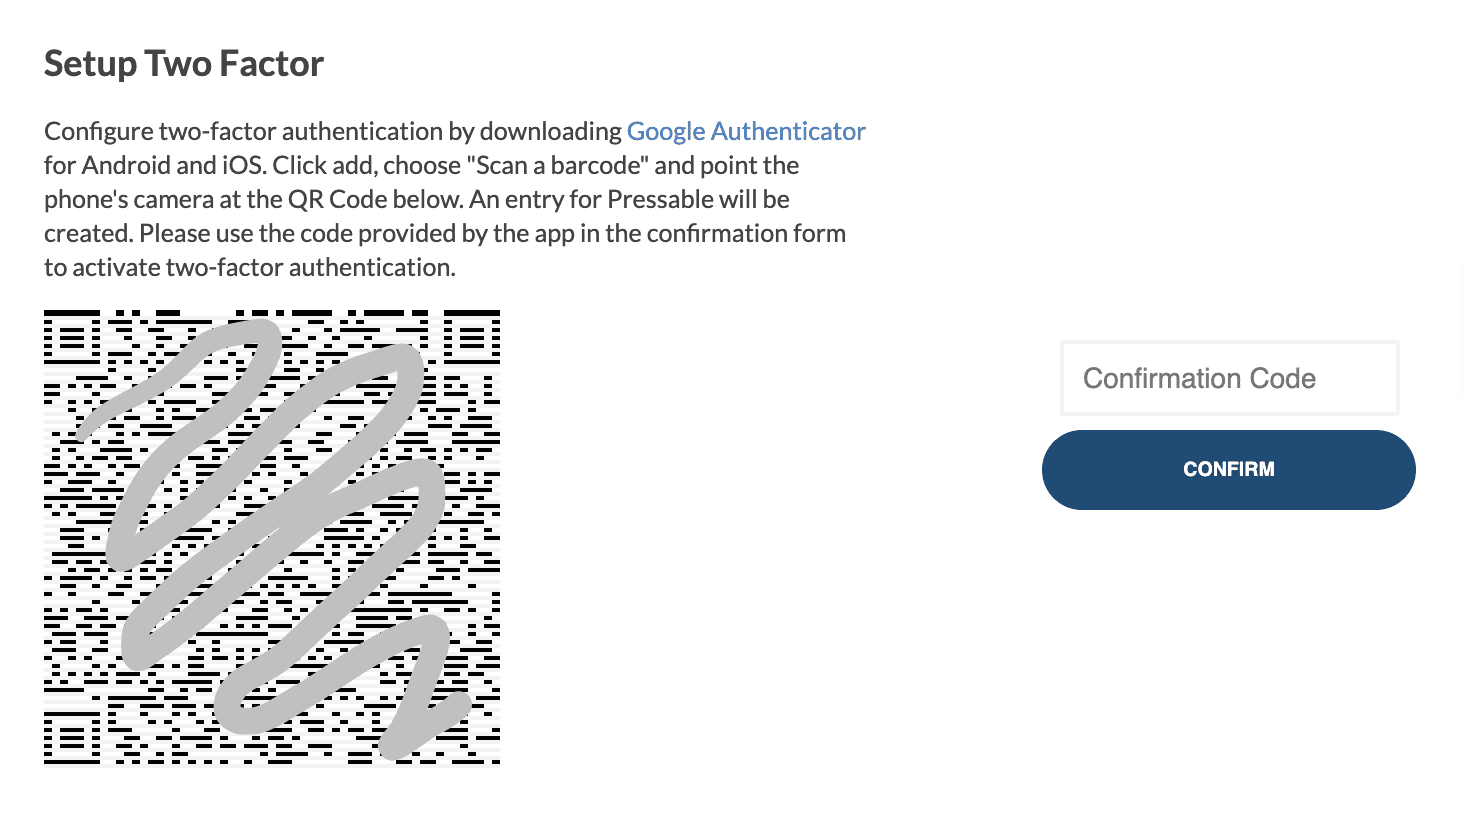 A prompt asking for a confirmation code to set up two-factor authentication